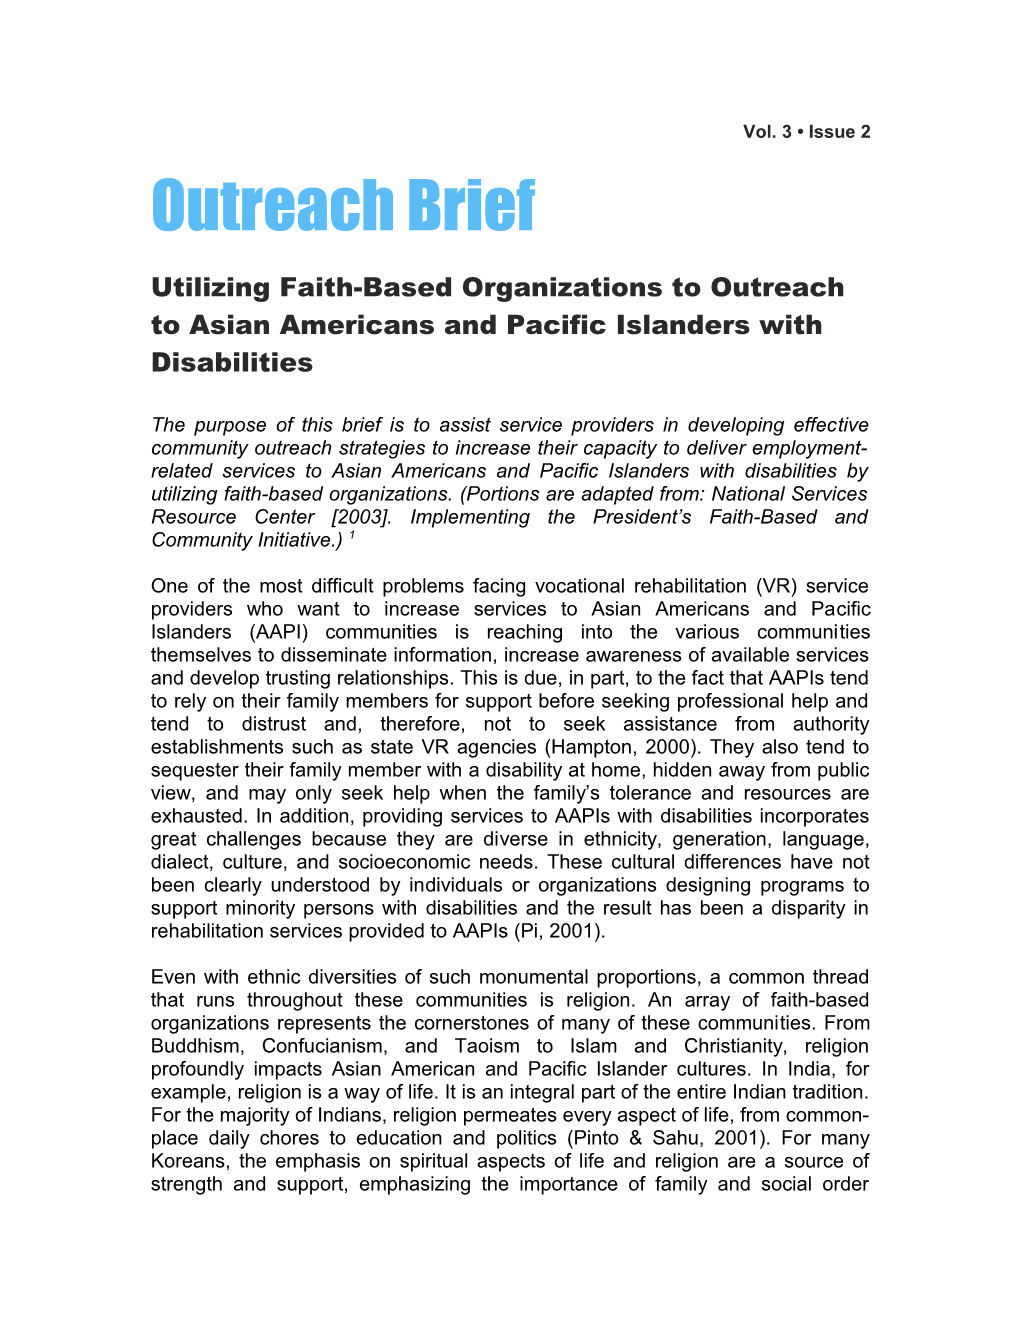 Utilizing Faith-Based Organizations to Outreach to Asian Americans and Pacific Islanders